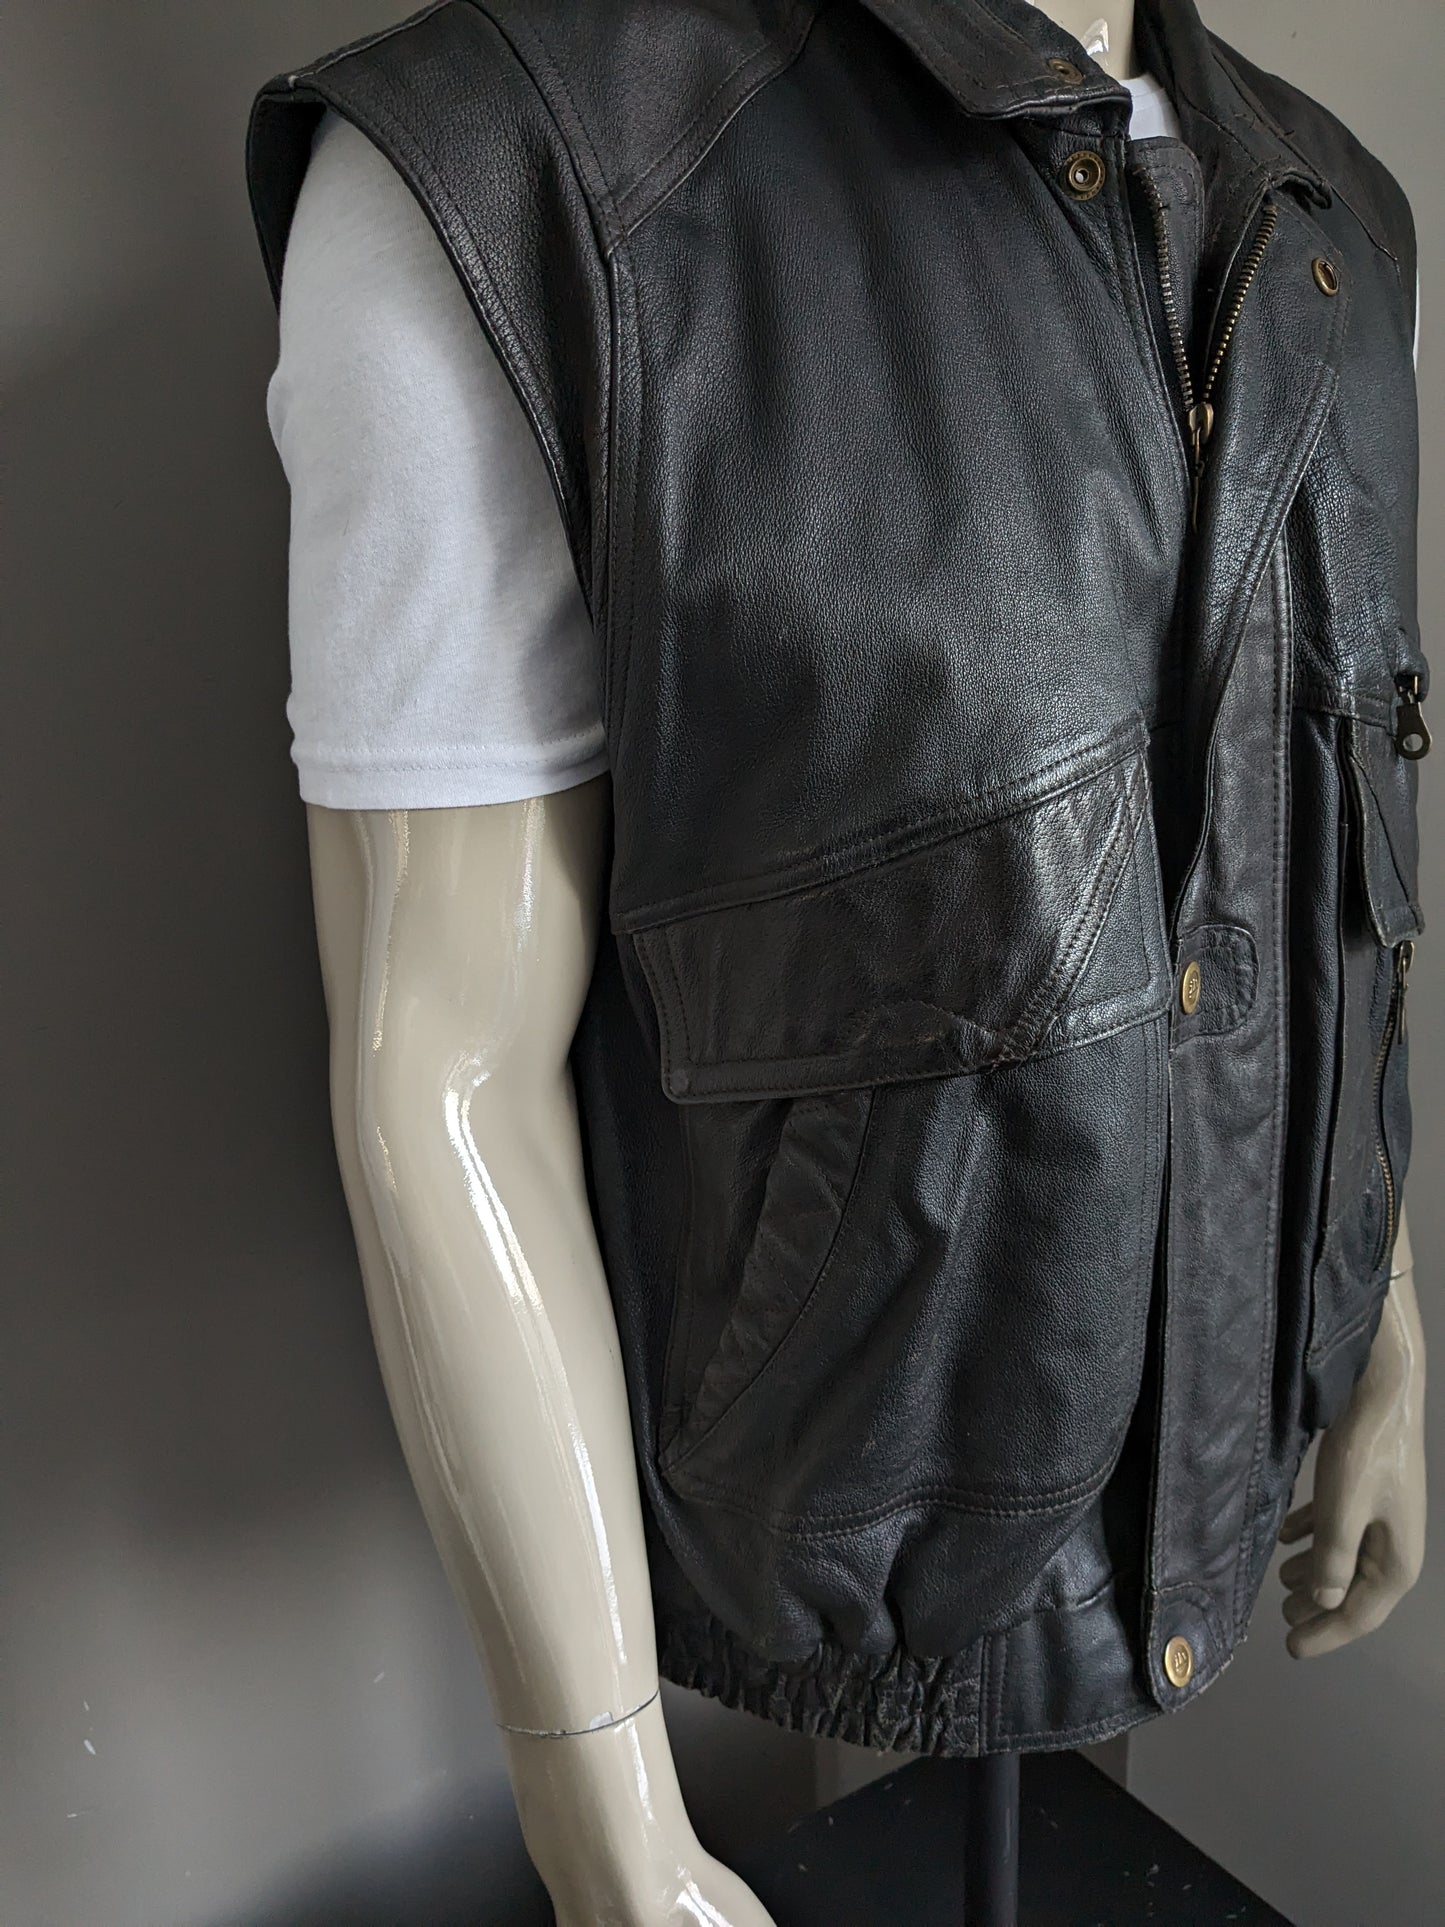 Henry Morrel Vintage Leather Body Warmer / waistcoat with double closure. Black. Size XL / XXL.